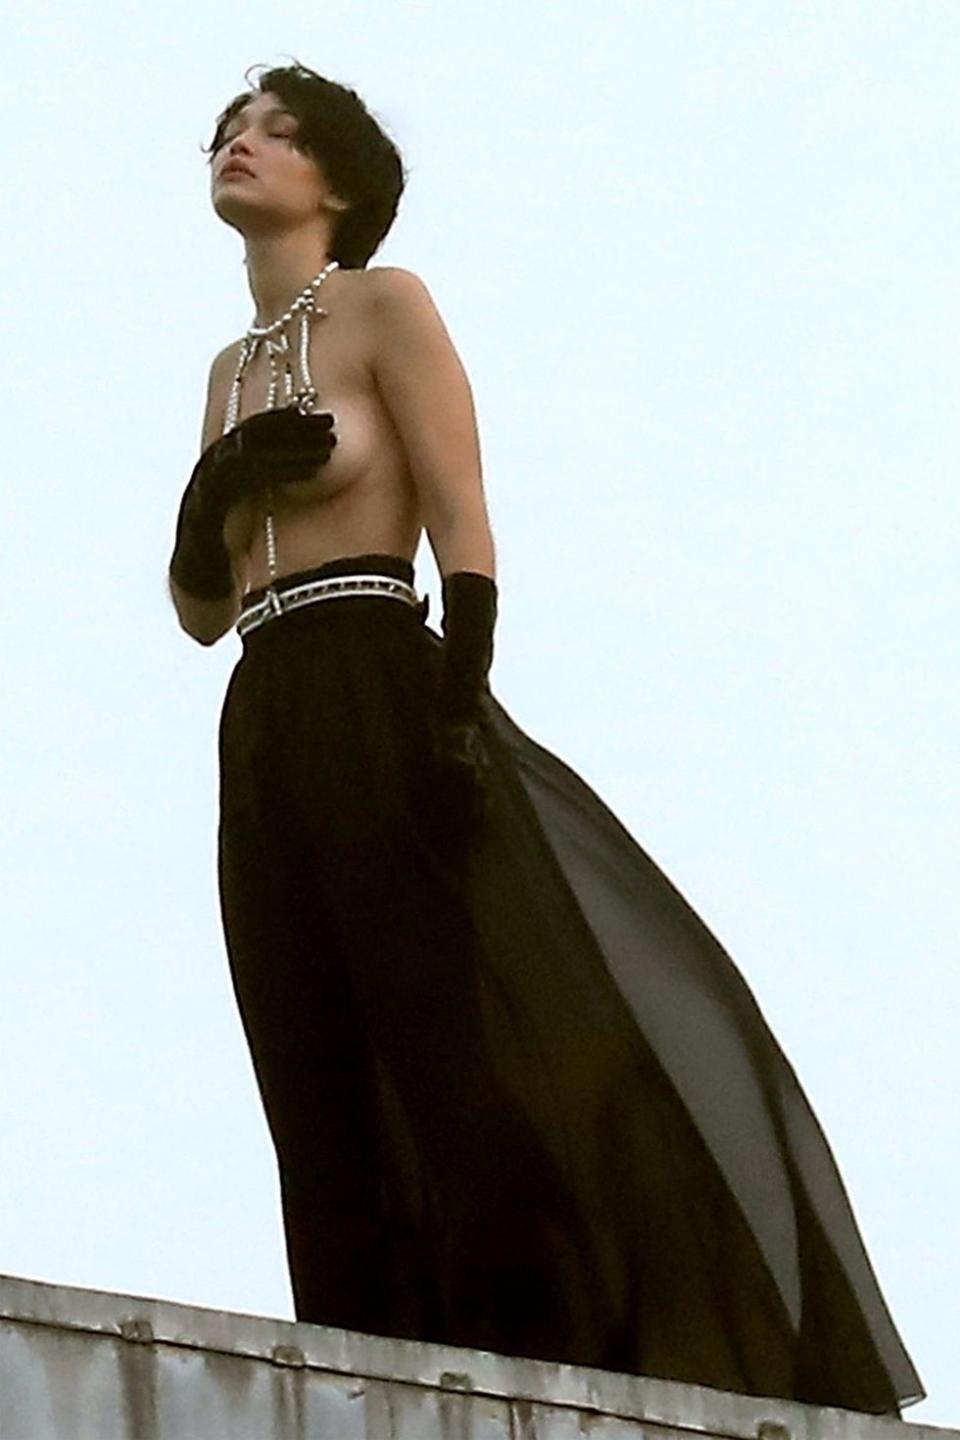 Gigi Hadid Goes Topless and Wears a Wig for Dramatic Chanel Photoshoot